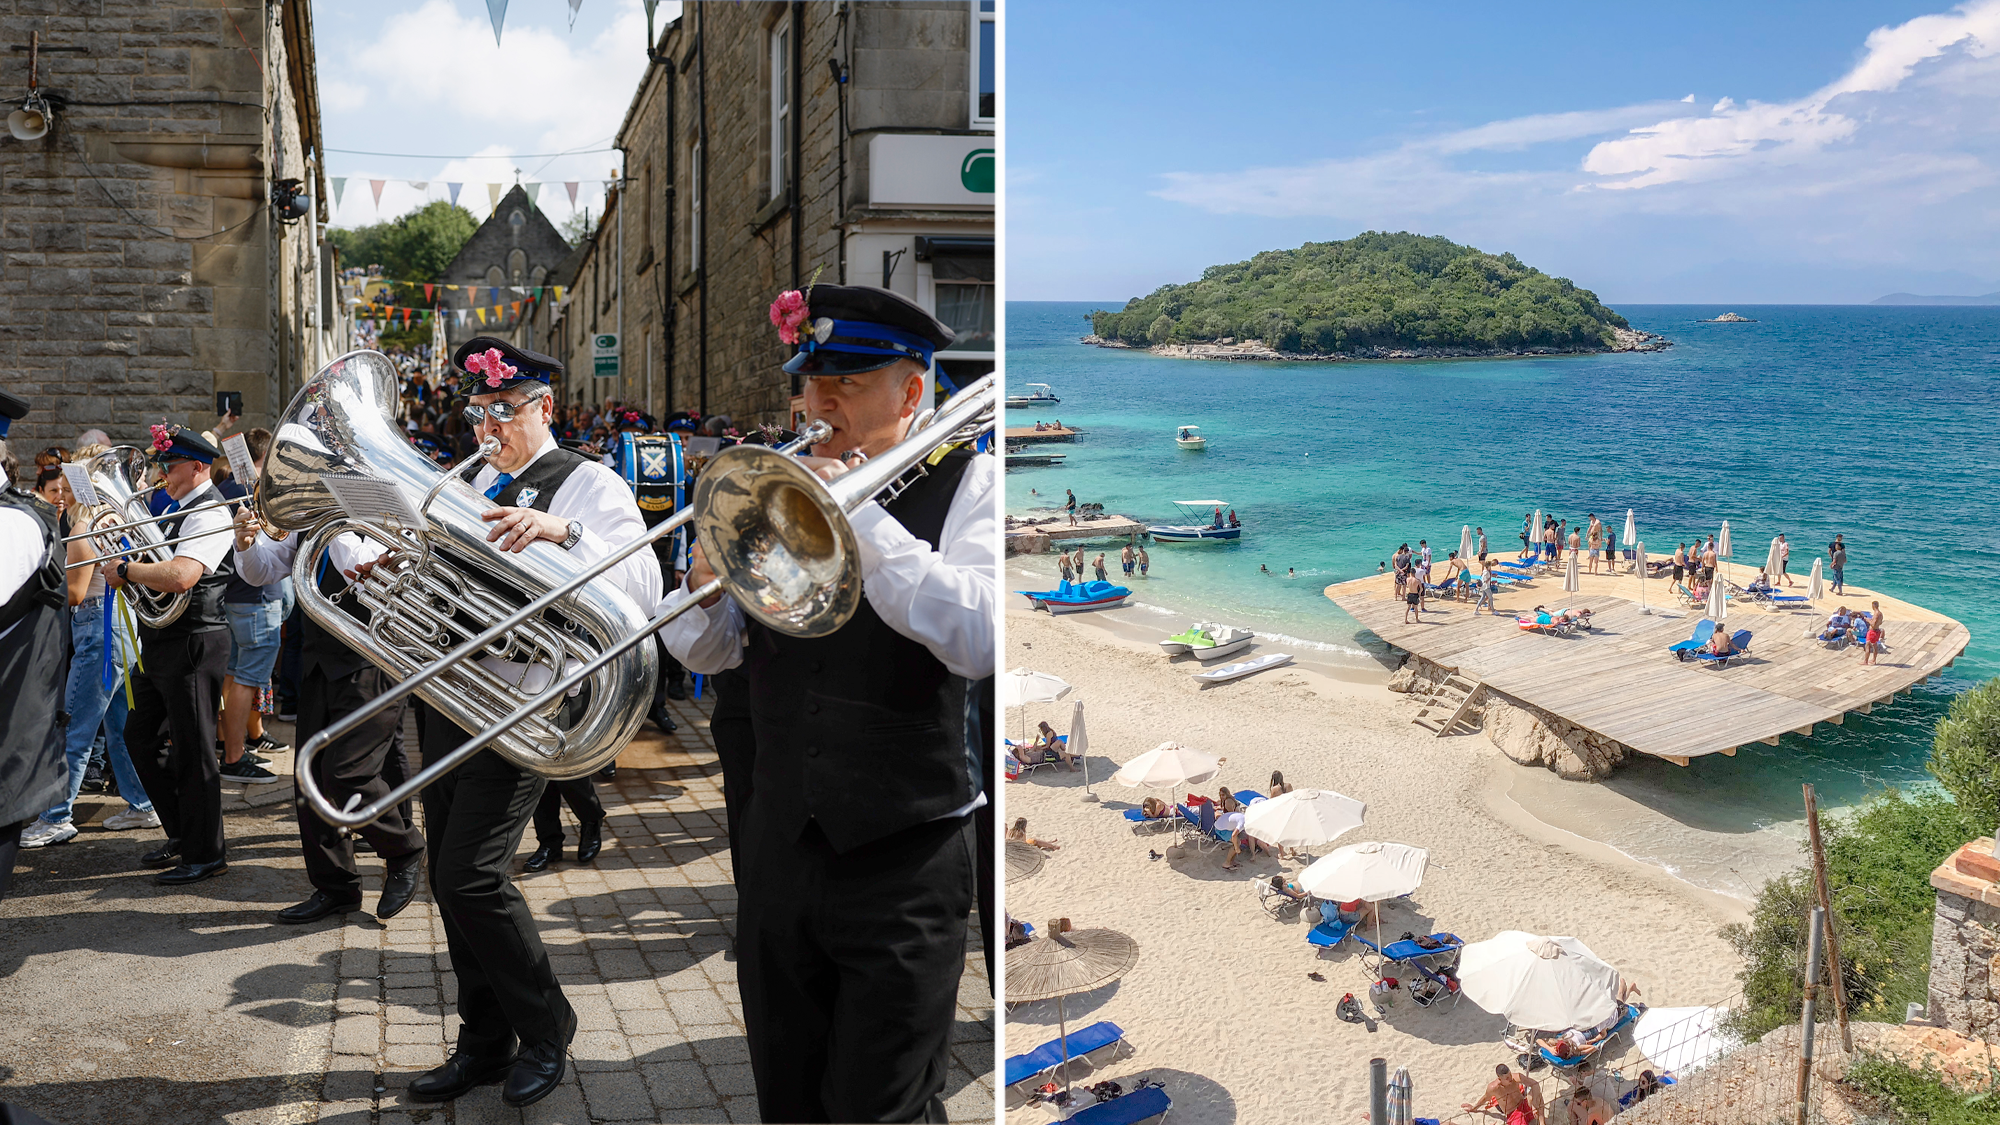 The brass band plays as the procession makes its way through the town during the Langholm Common Riding; soak up the sun without the crowds at Albania's beaches. 